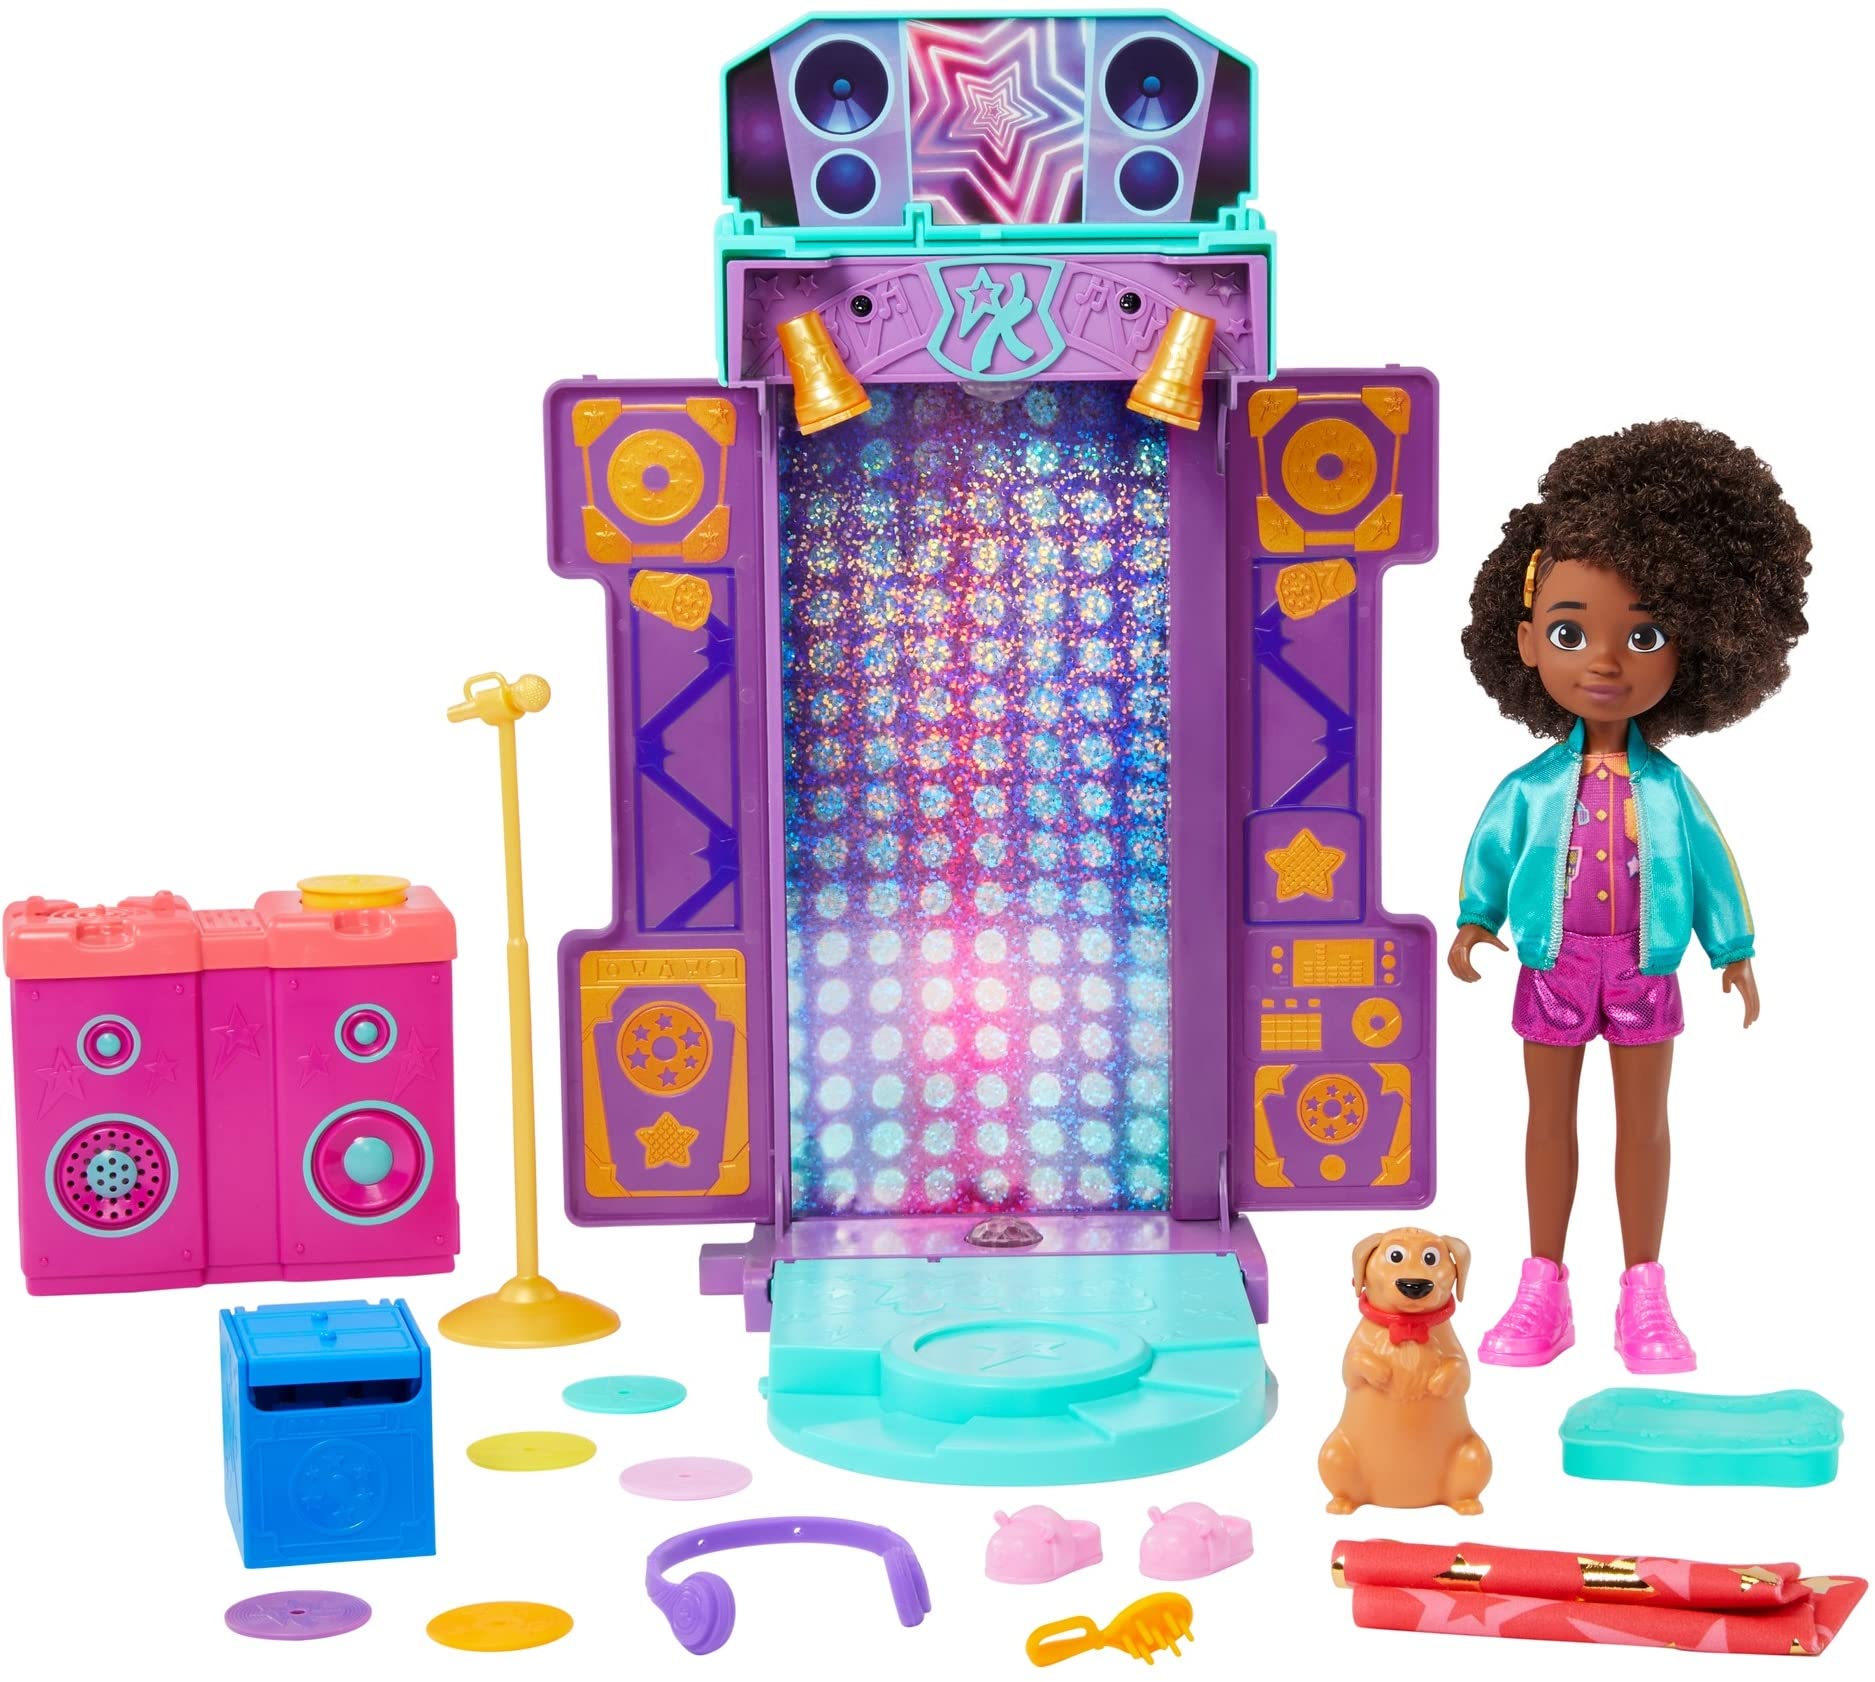 Karma's World Toy Playset with Doll & Accessories, Musical Star Stage with Lights & Sounds - $10.44 - Amazon